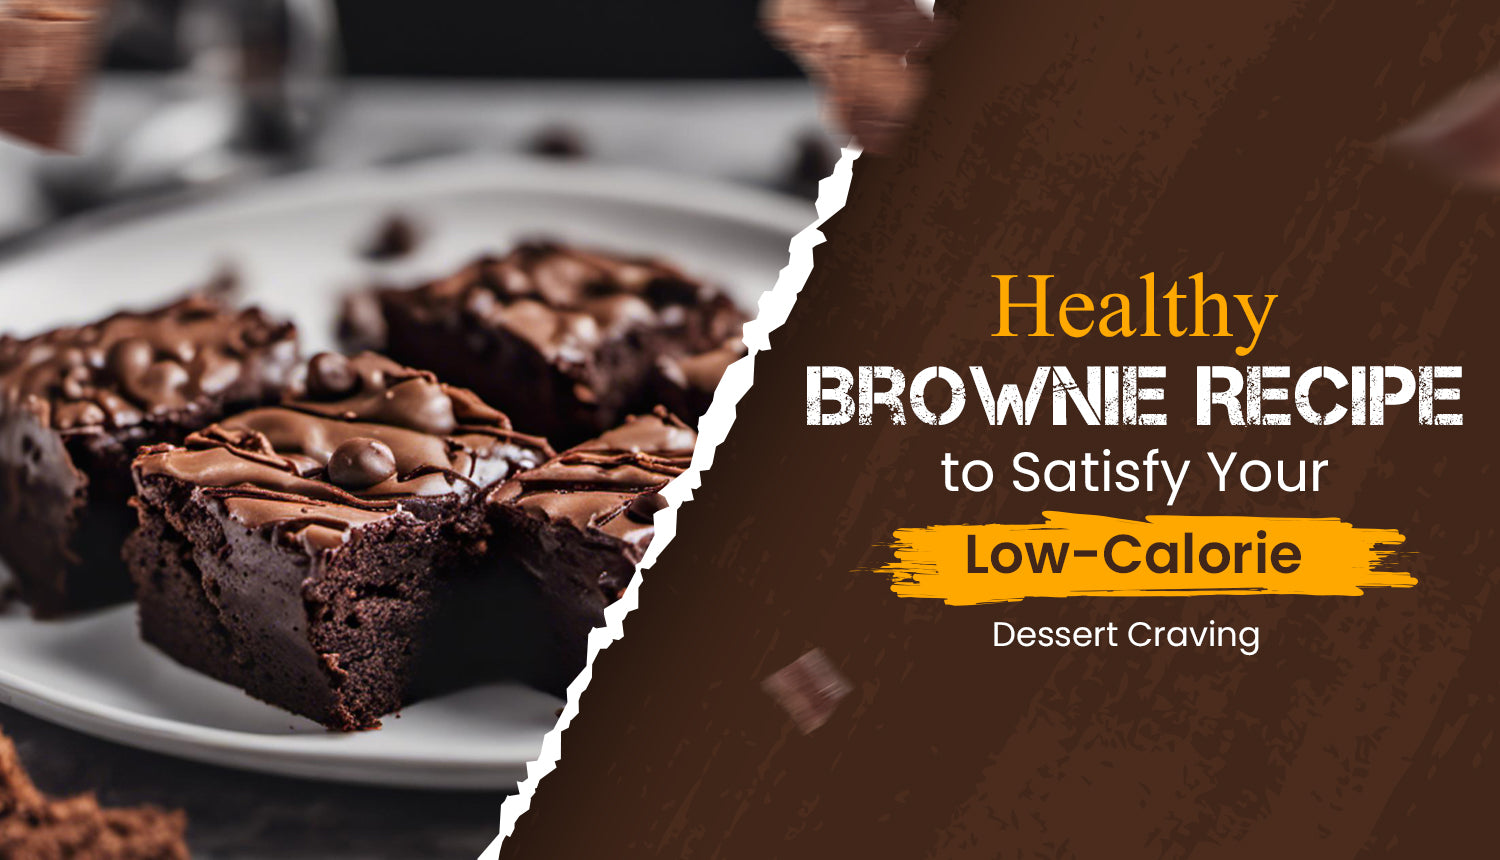 Healthy Brownie Recipe to Satisfy Your Low-Calorie Dessert Craving